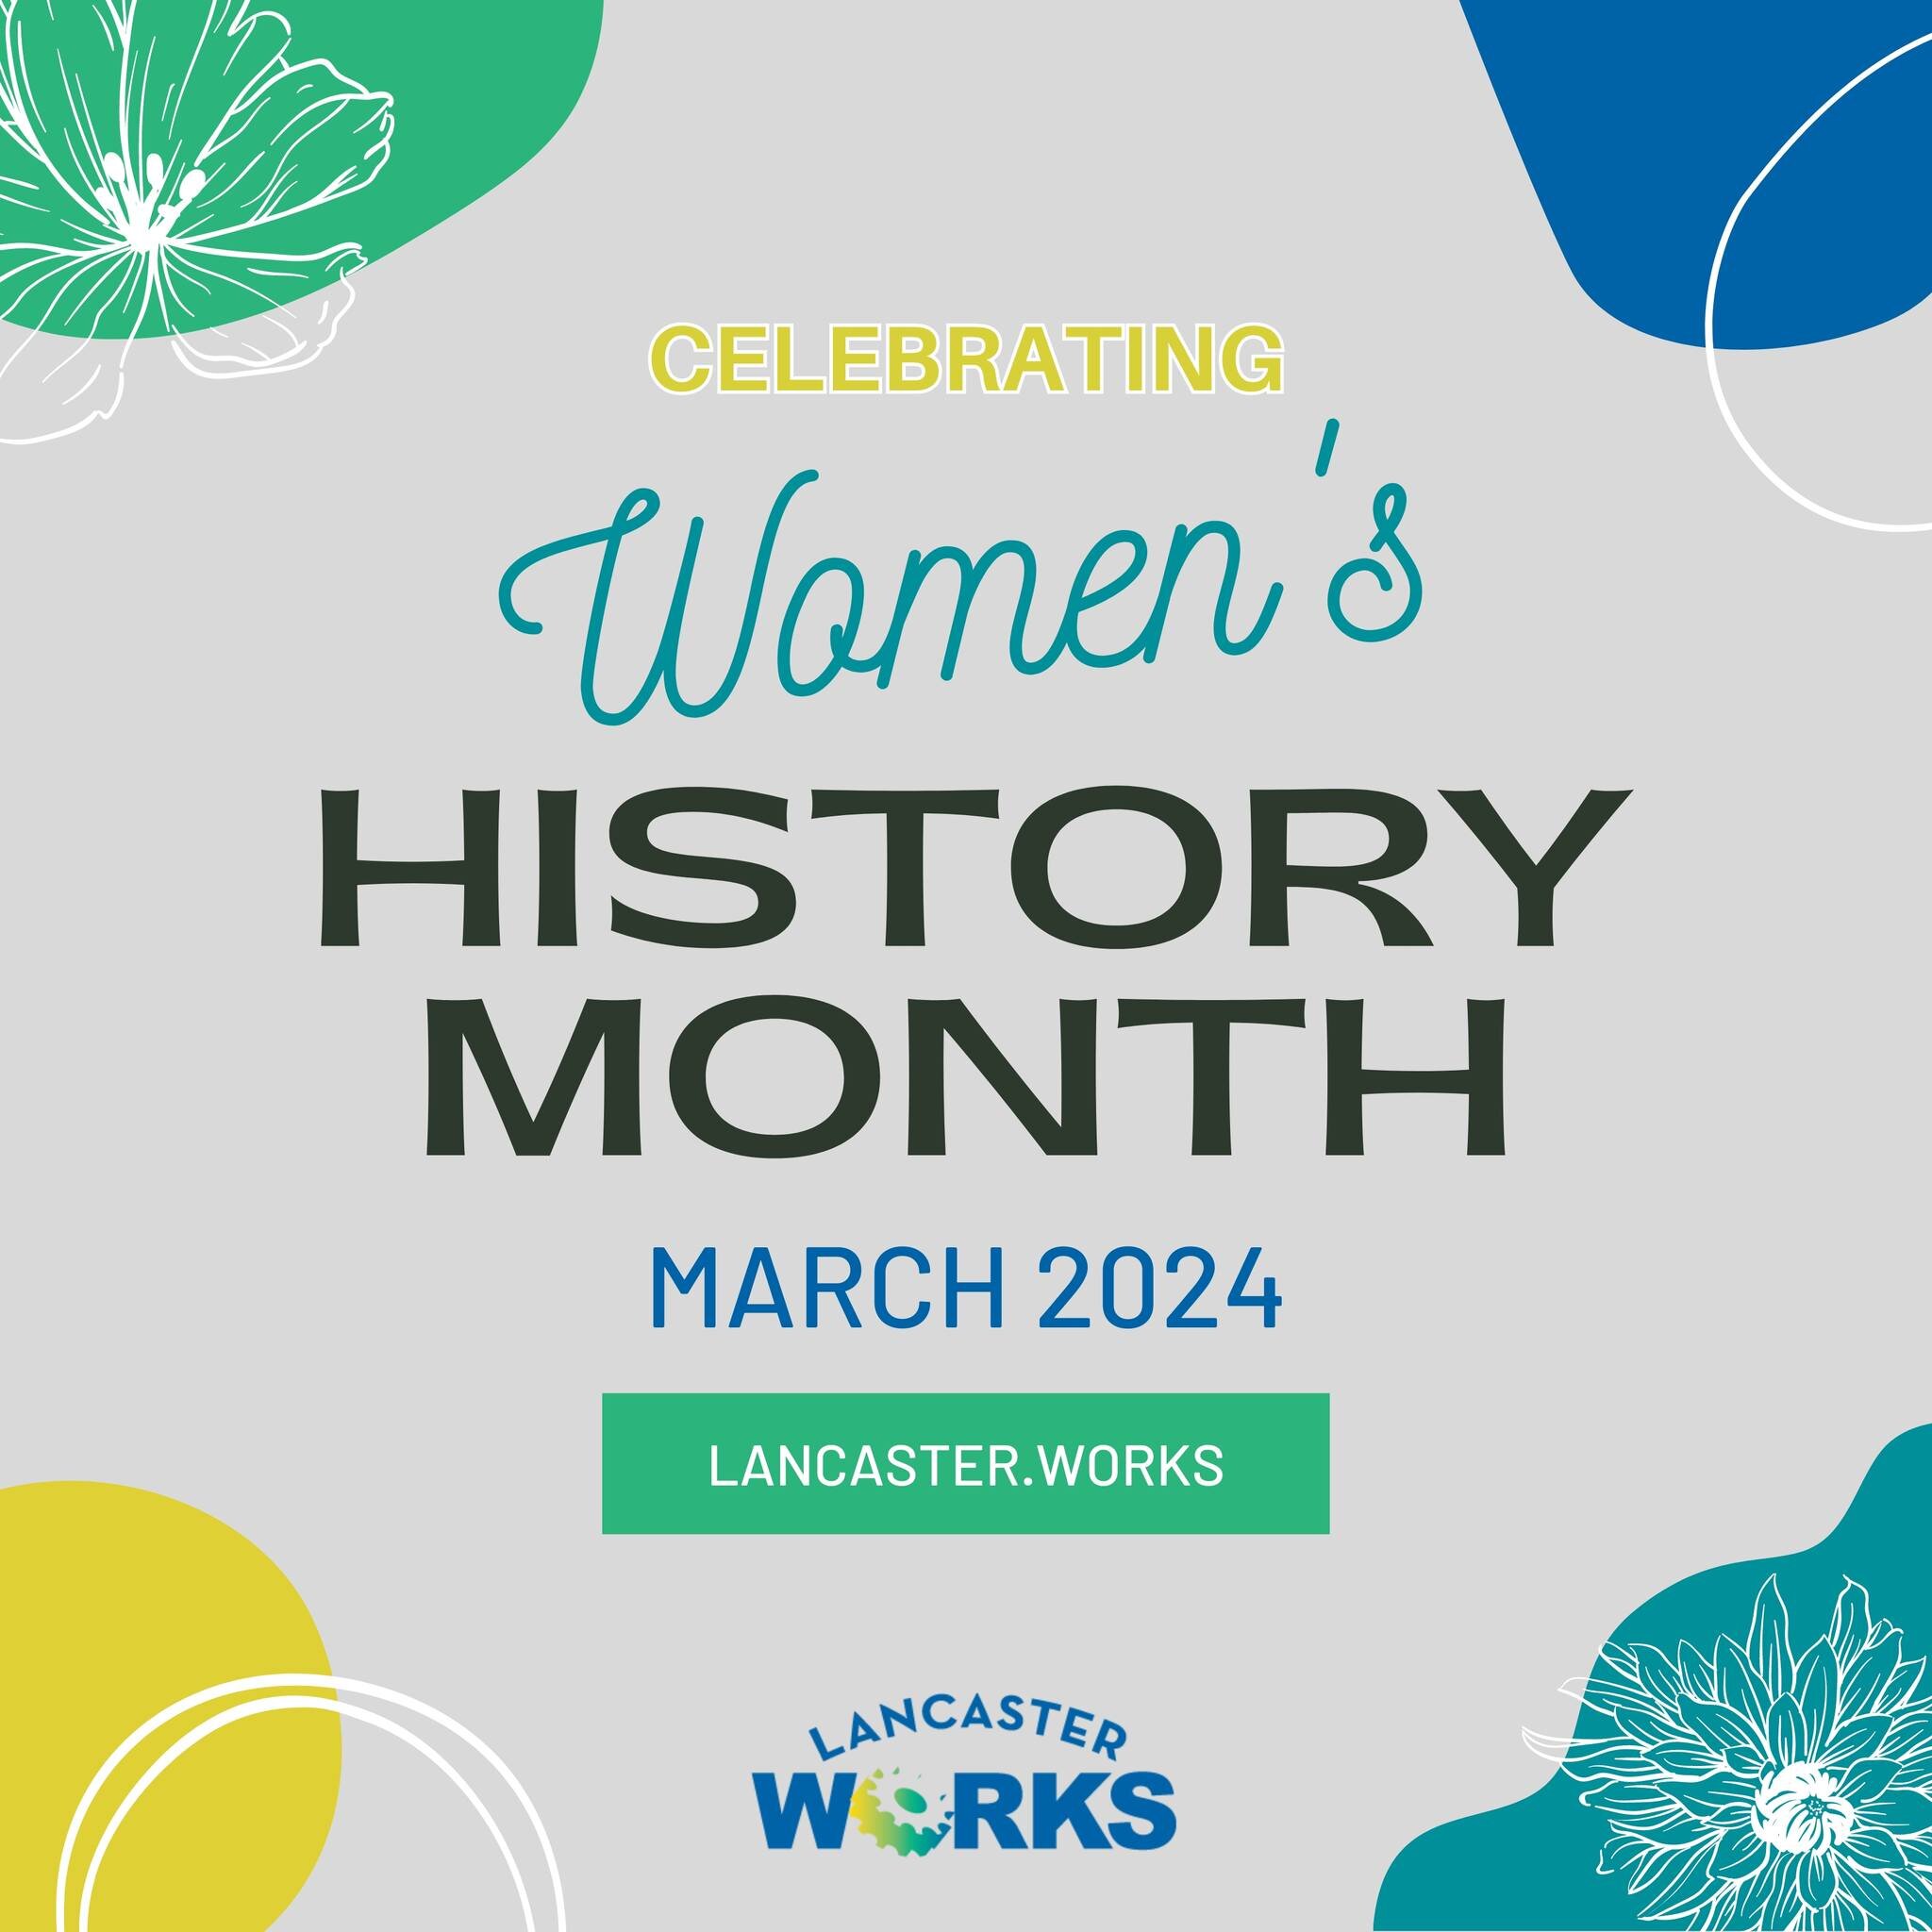 Happy Women's History Month!

The national theme for 2024 is &ldquo;Women Who Advocate for Equity, Diversity, and Inclusion&quot;

Celebrate women pioneering DEI initiatives and tag them below for a feature!

https://www.lancaster.works/